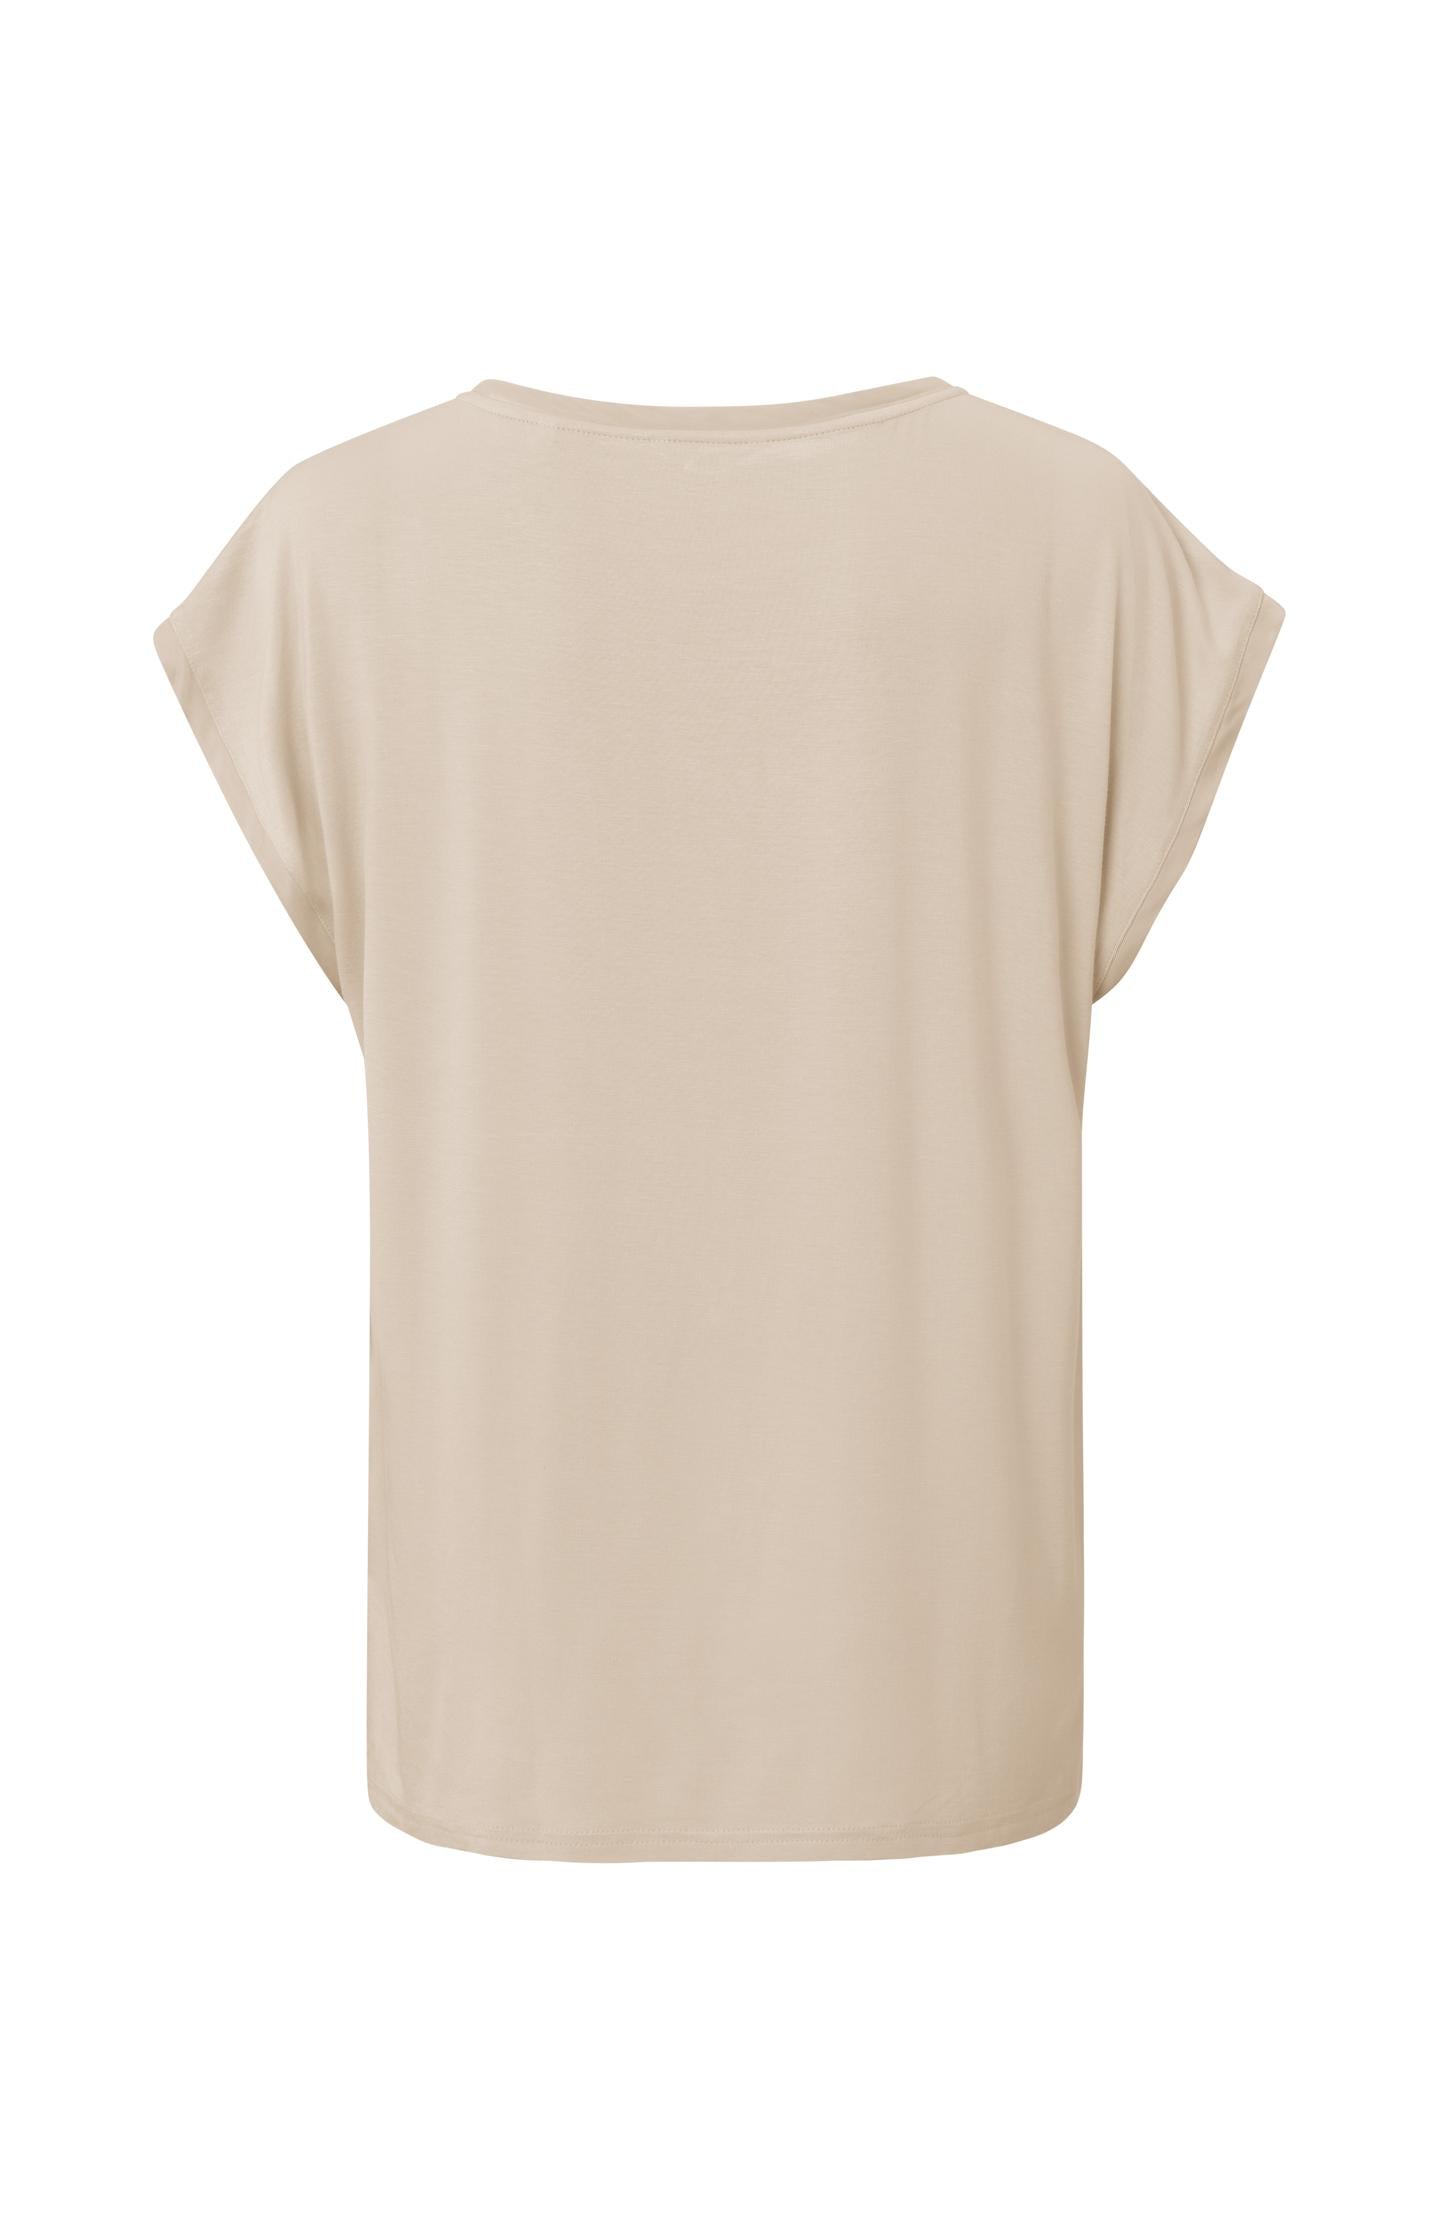 Top with round neck and cap sleeves without shoulder seams